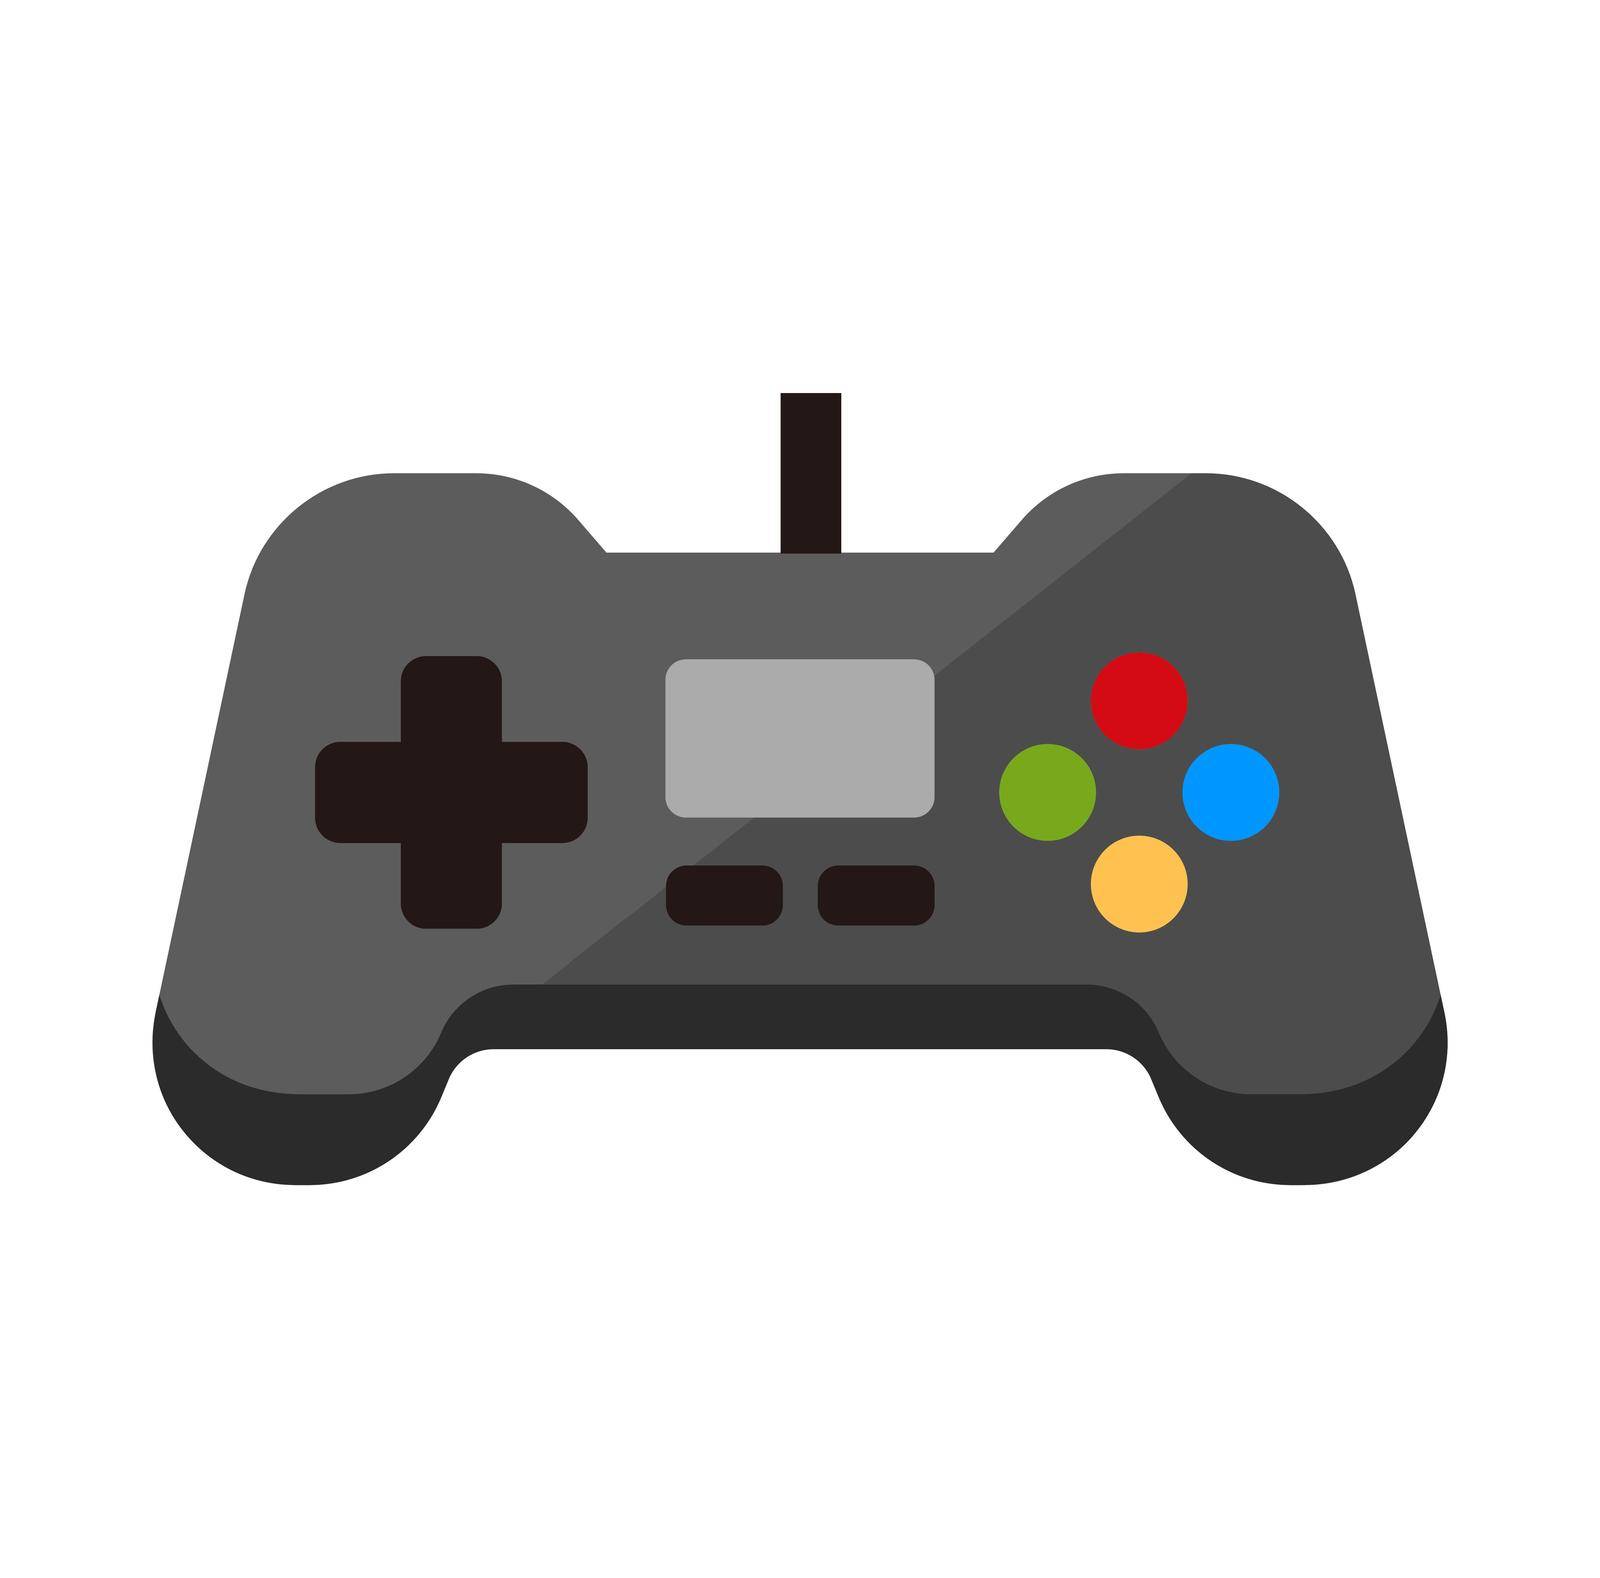 Game Controller, game pad, video game / vector icon illustration by barks